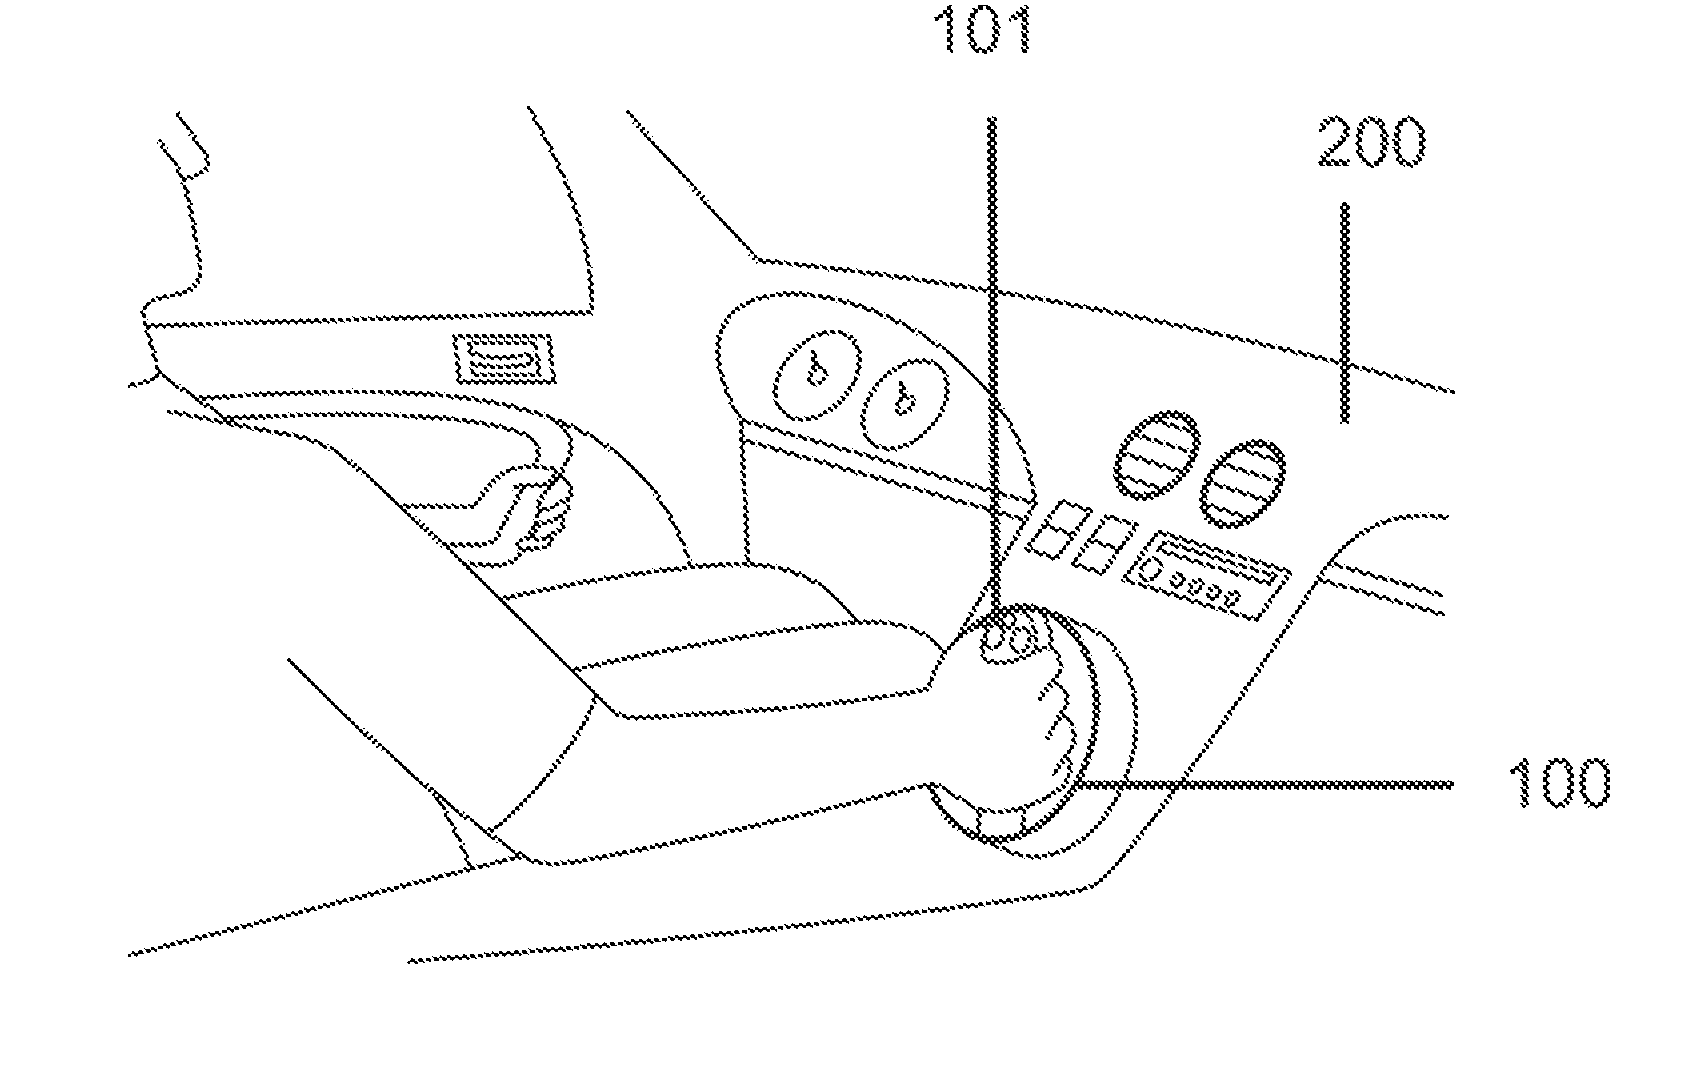 Steering System Applied to Motor Vehicles